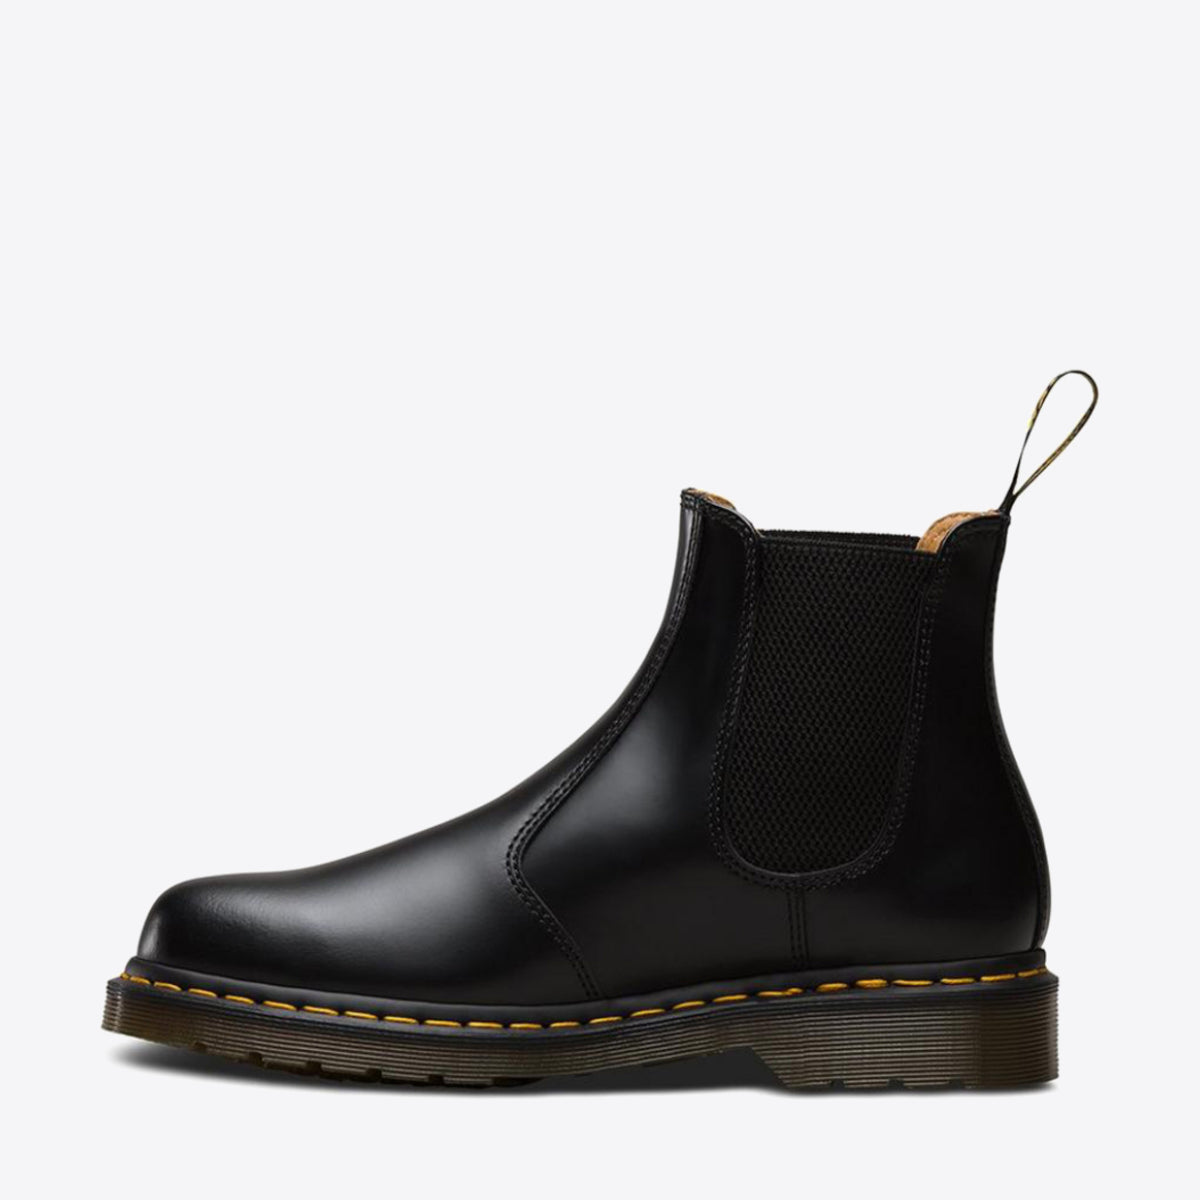  2976 Yellow Stitch Chelsea Boots Black Smooth